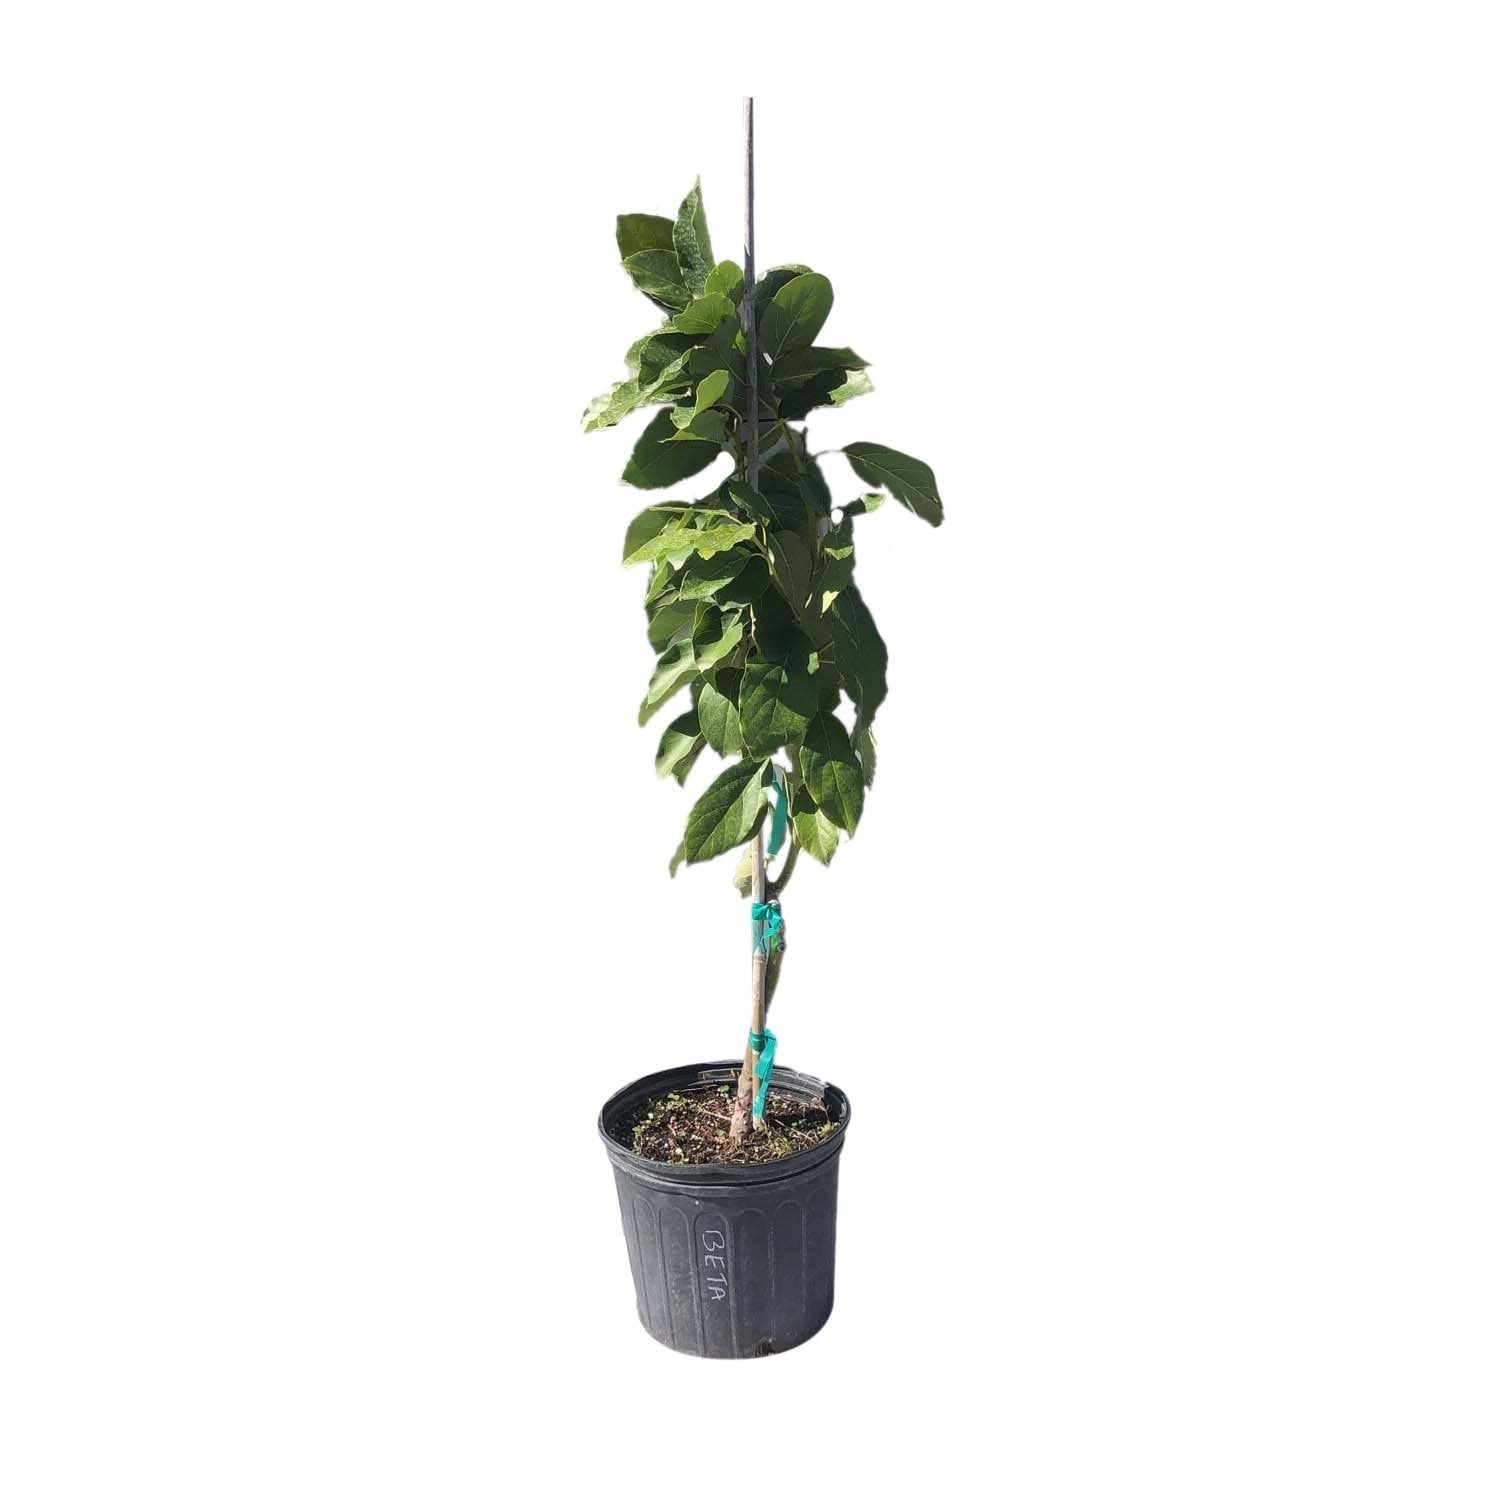 Beta Avocado Tree, Grafted, 3 Gal Container from Florida